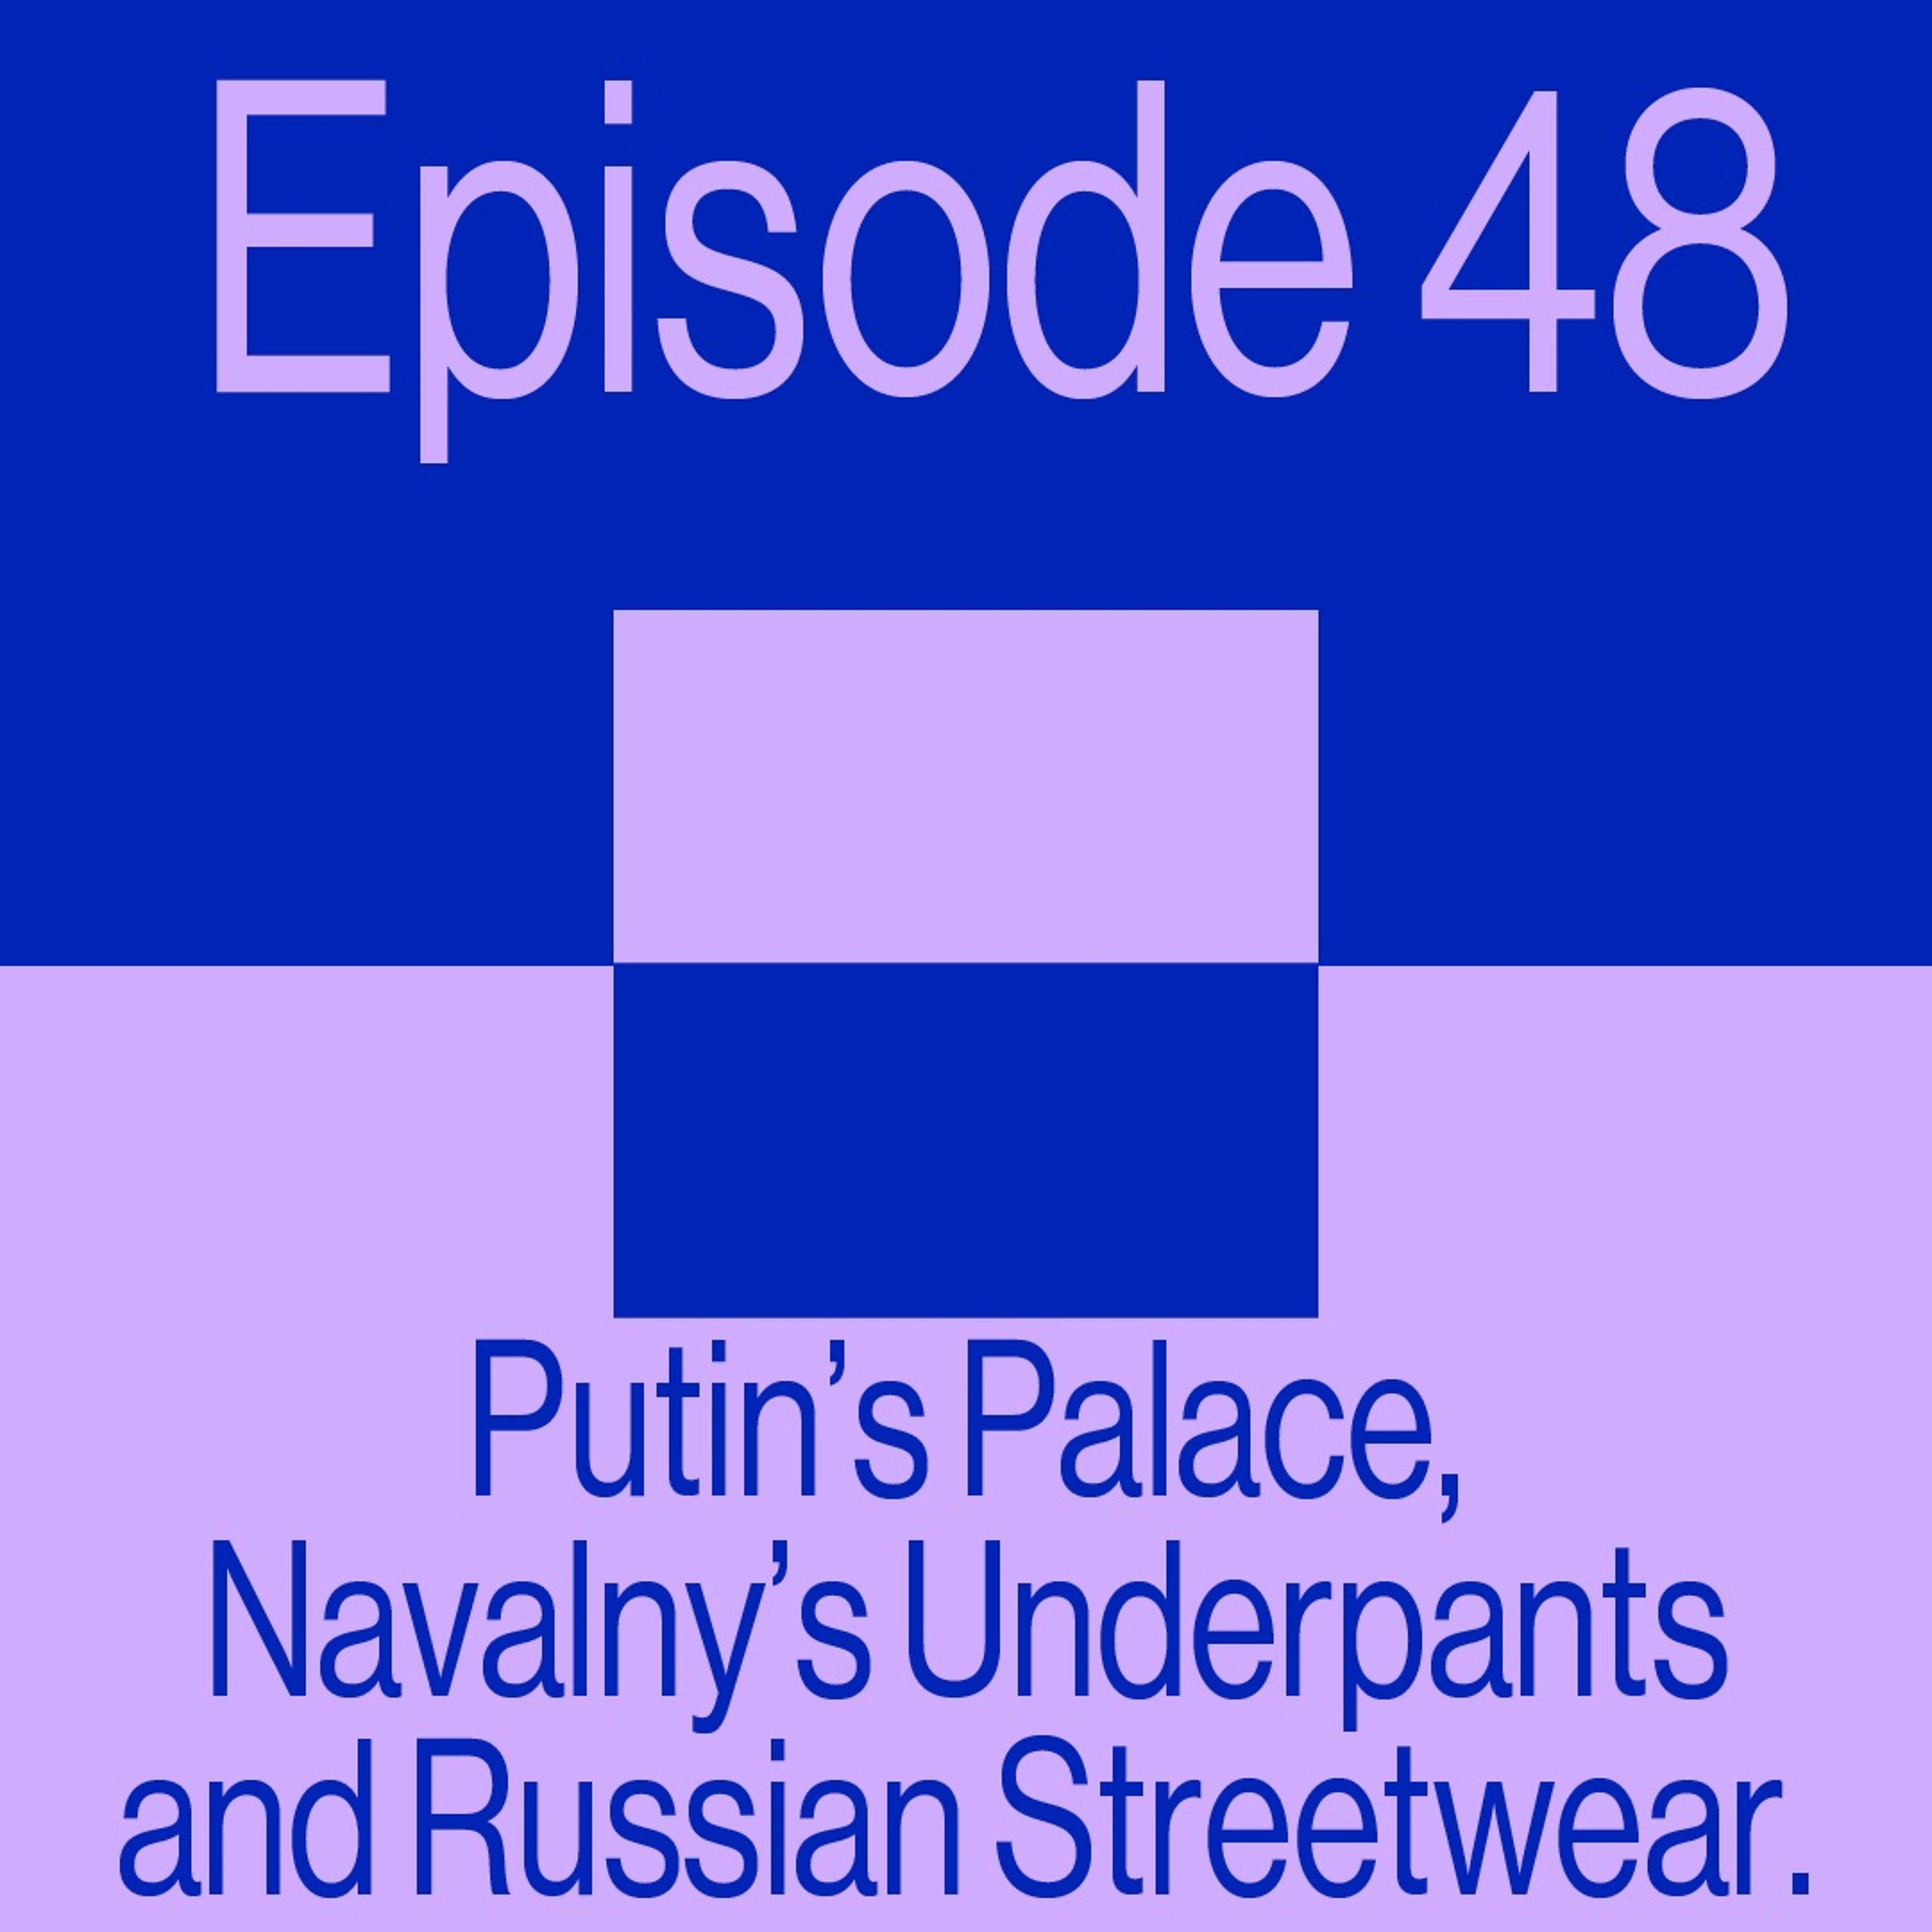 Episode 48: Putin’s Palace, Navalny’s Underpants, and Russian Streetwear